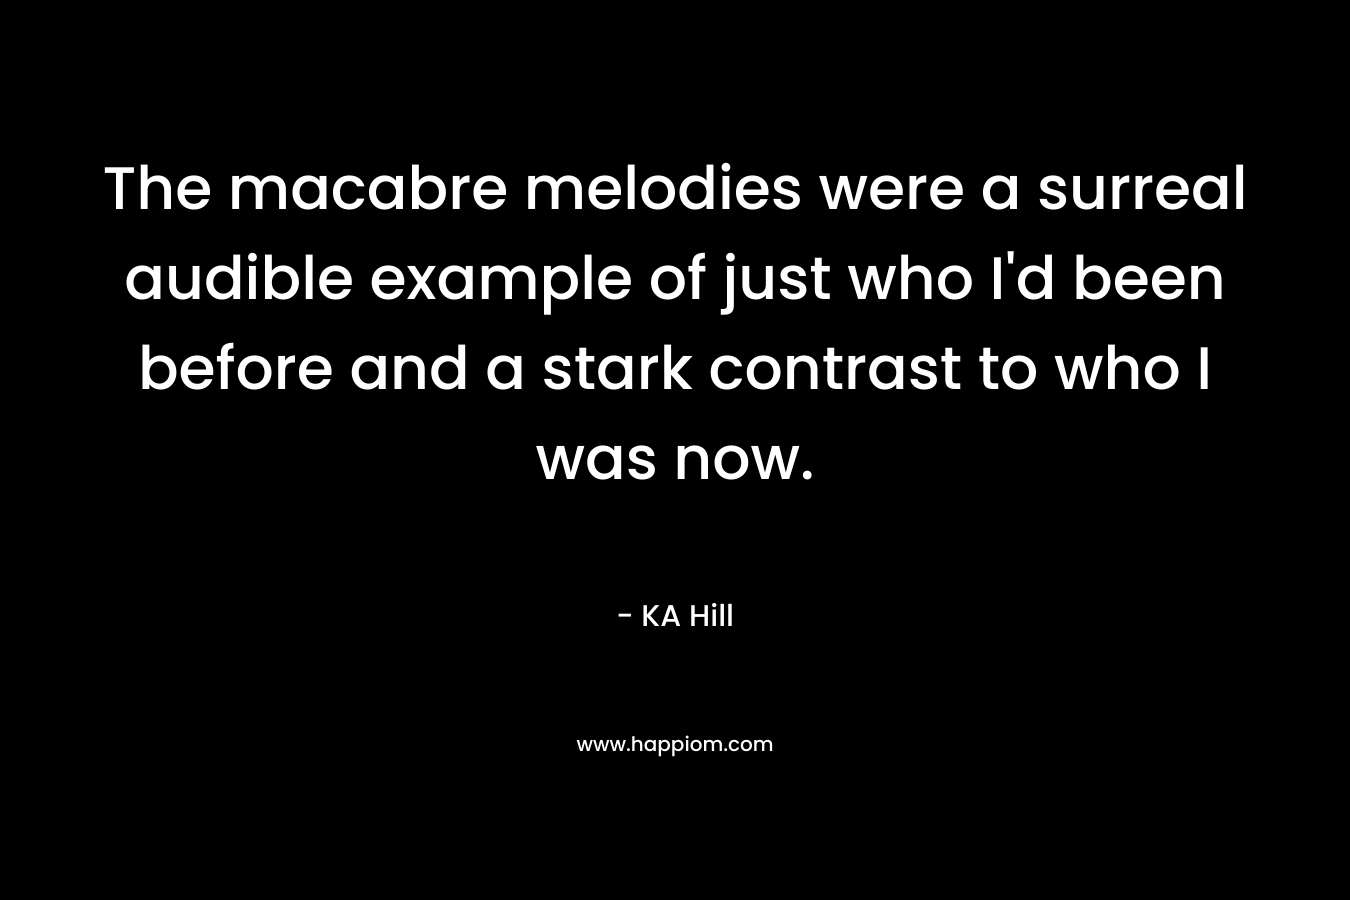 The macabre melodies were a surreal audible example of just who I’d been before and a stark contrast to who I was now. – KA Hill